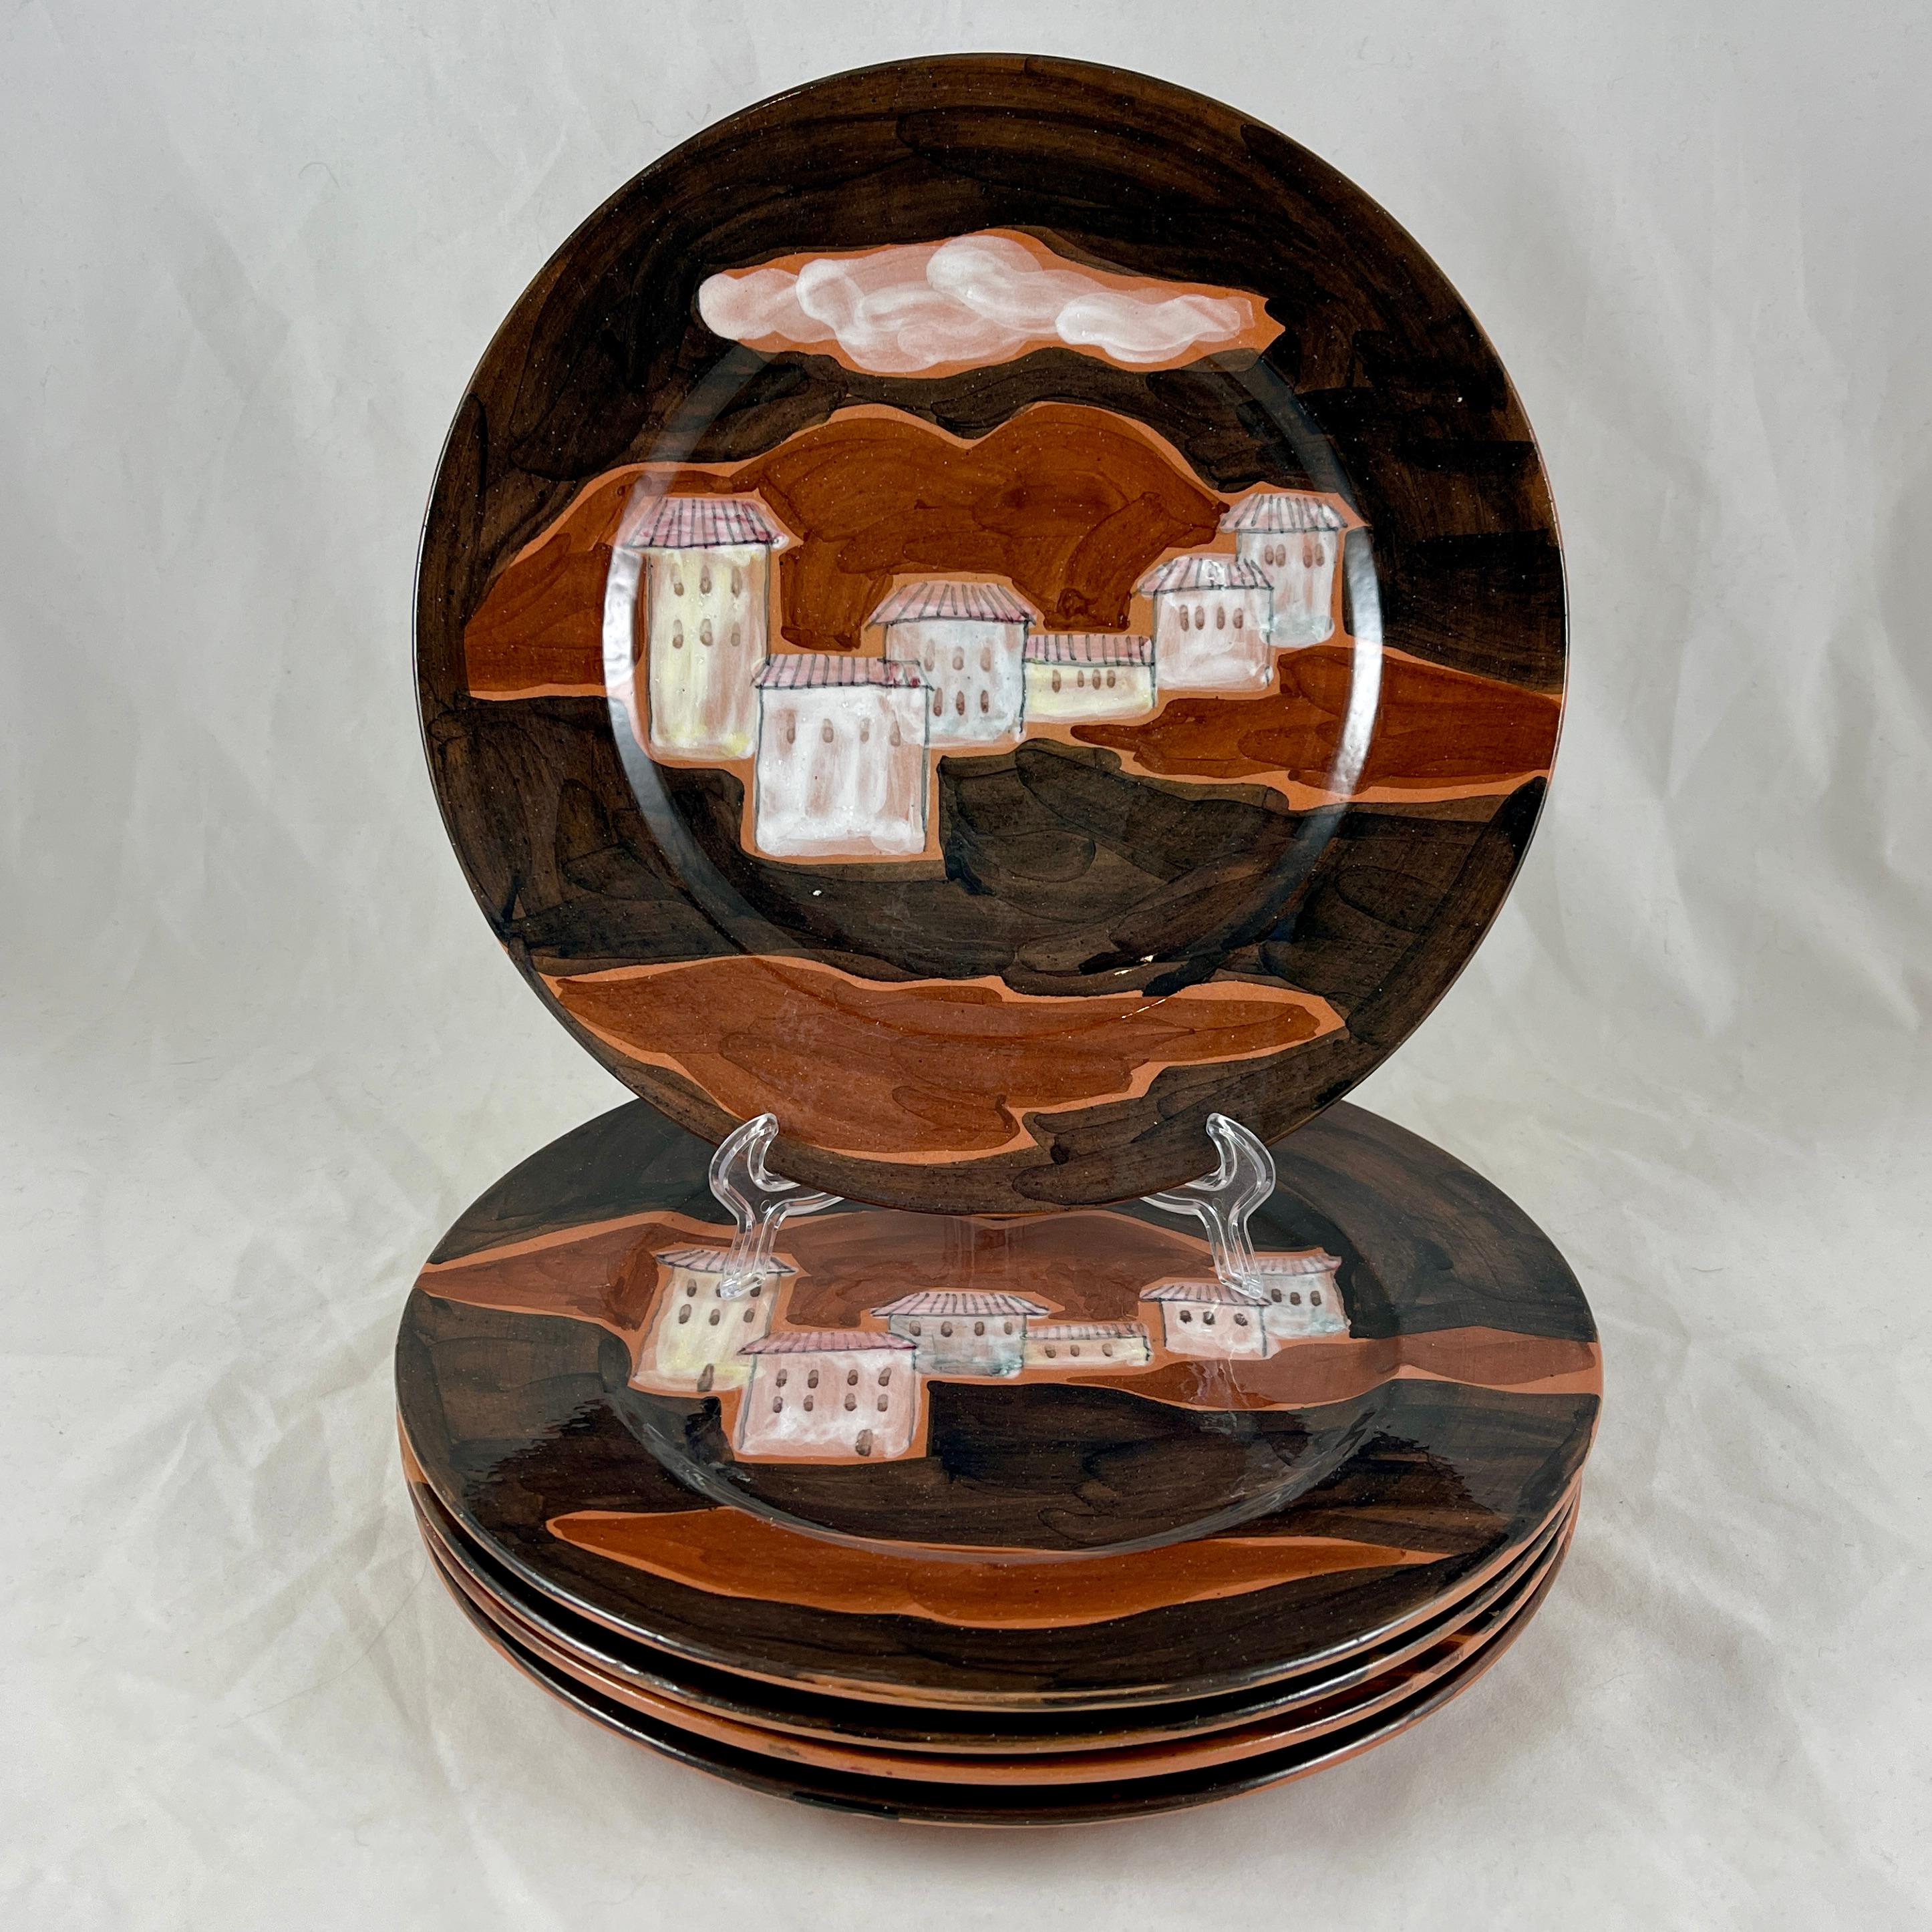 Mid-Century Modern pottery plates, designed and hand-painted by the American industrial designer Ed E. Langbein, and manufactured in Italy, circa 1930-1950.

Offered individually, each earthenware plate shows a variation of an Italian hillside